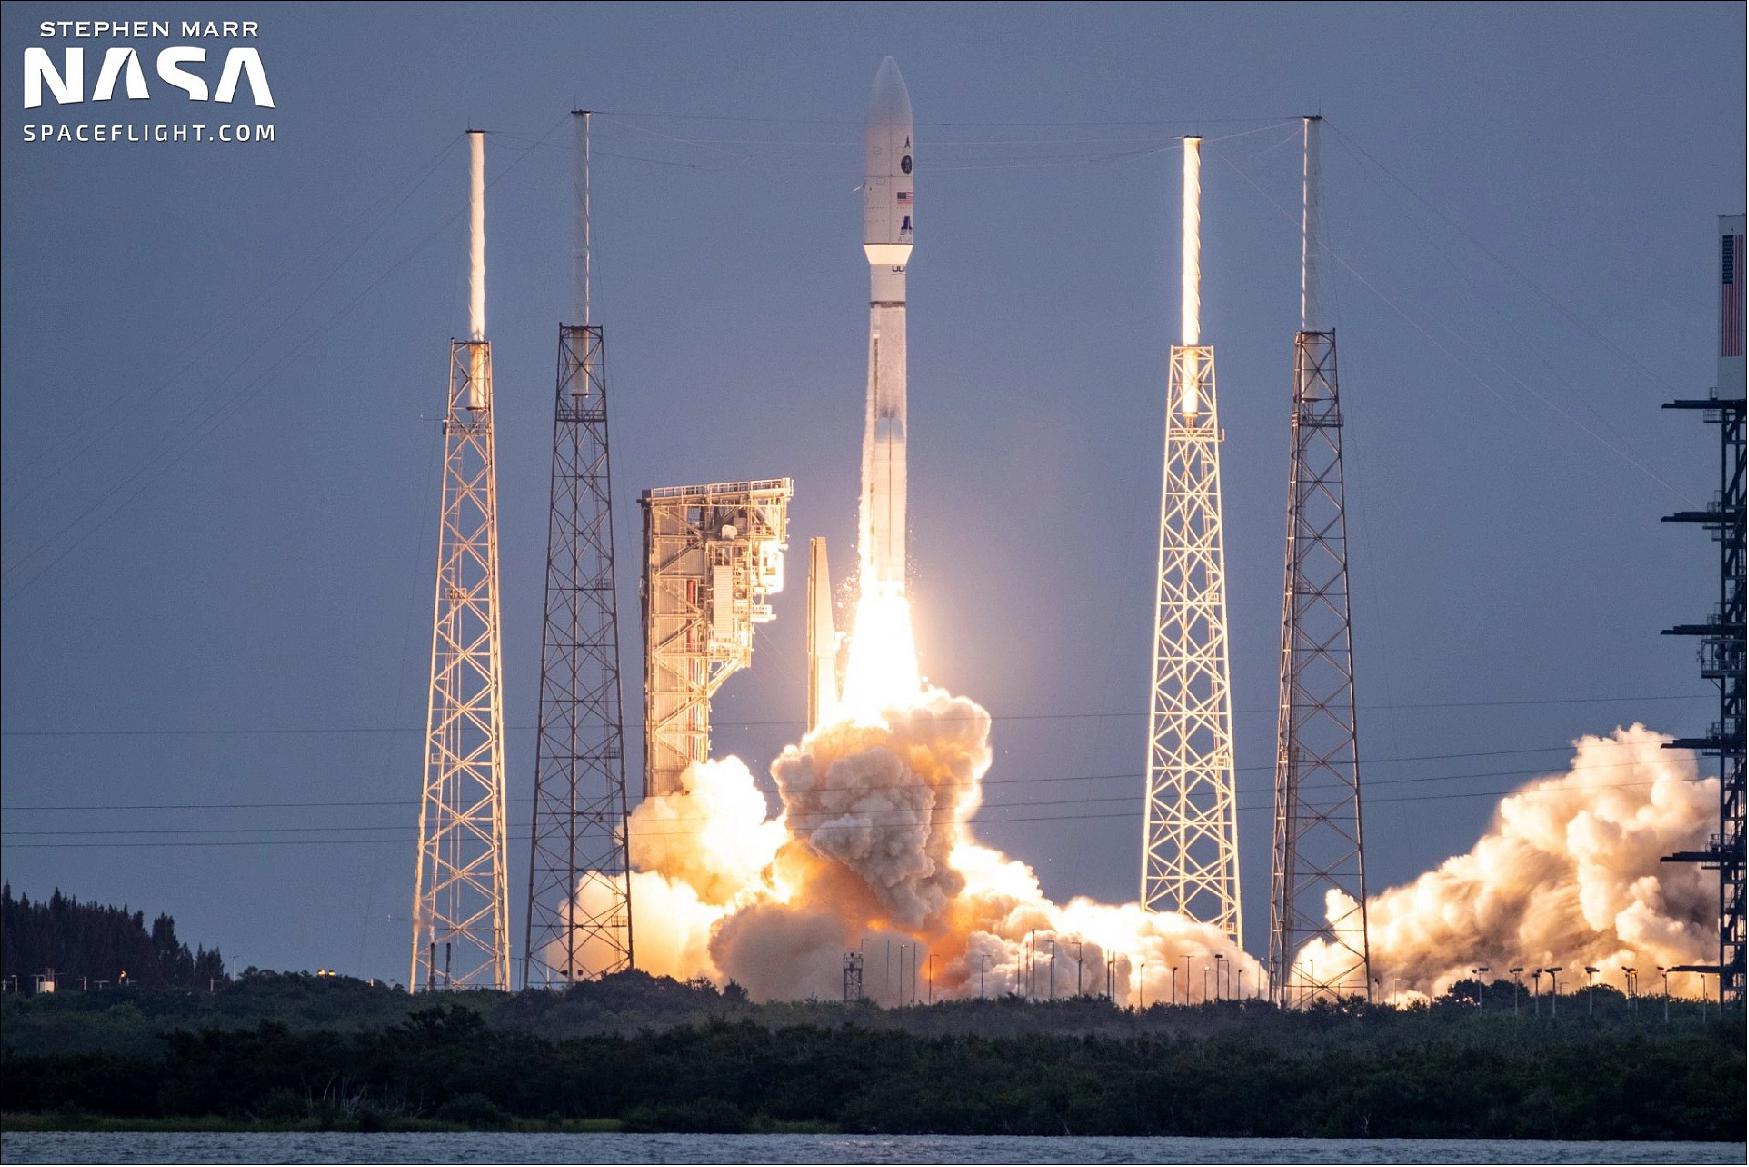 Figure 2: Launch of the USS-12 mission from Cape Canaveral Space Force Station (image credit: NASA Spaceflight, Stephen Marr)